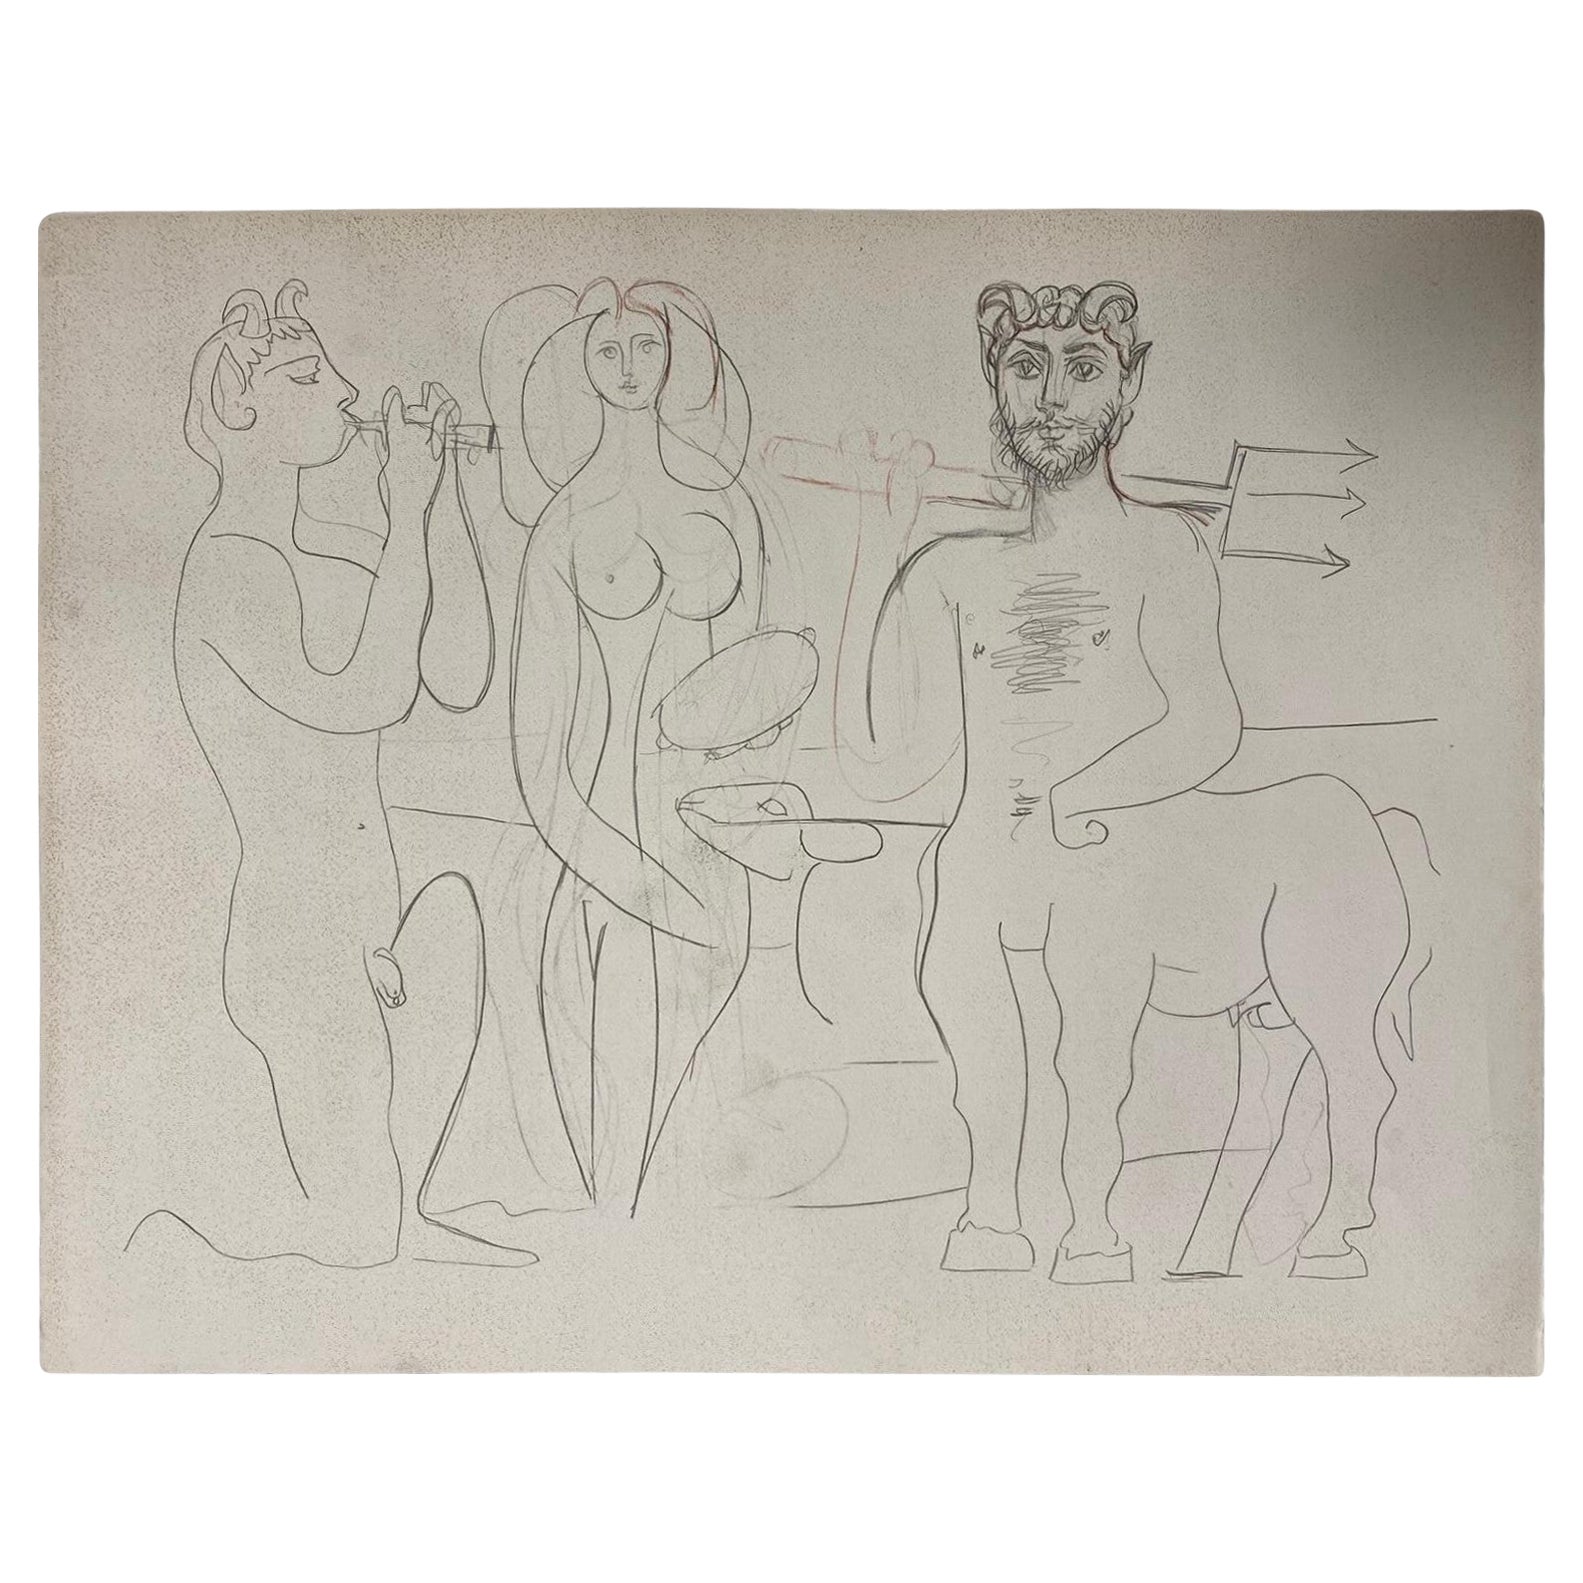 Pablo Picasso Limited Ed. Lithograph From Portfolio Les Dessins D'Antibes, 1958 For Sale